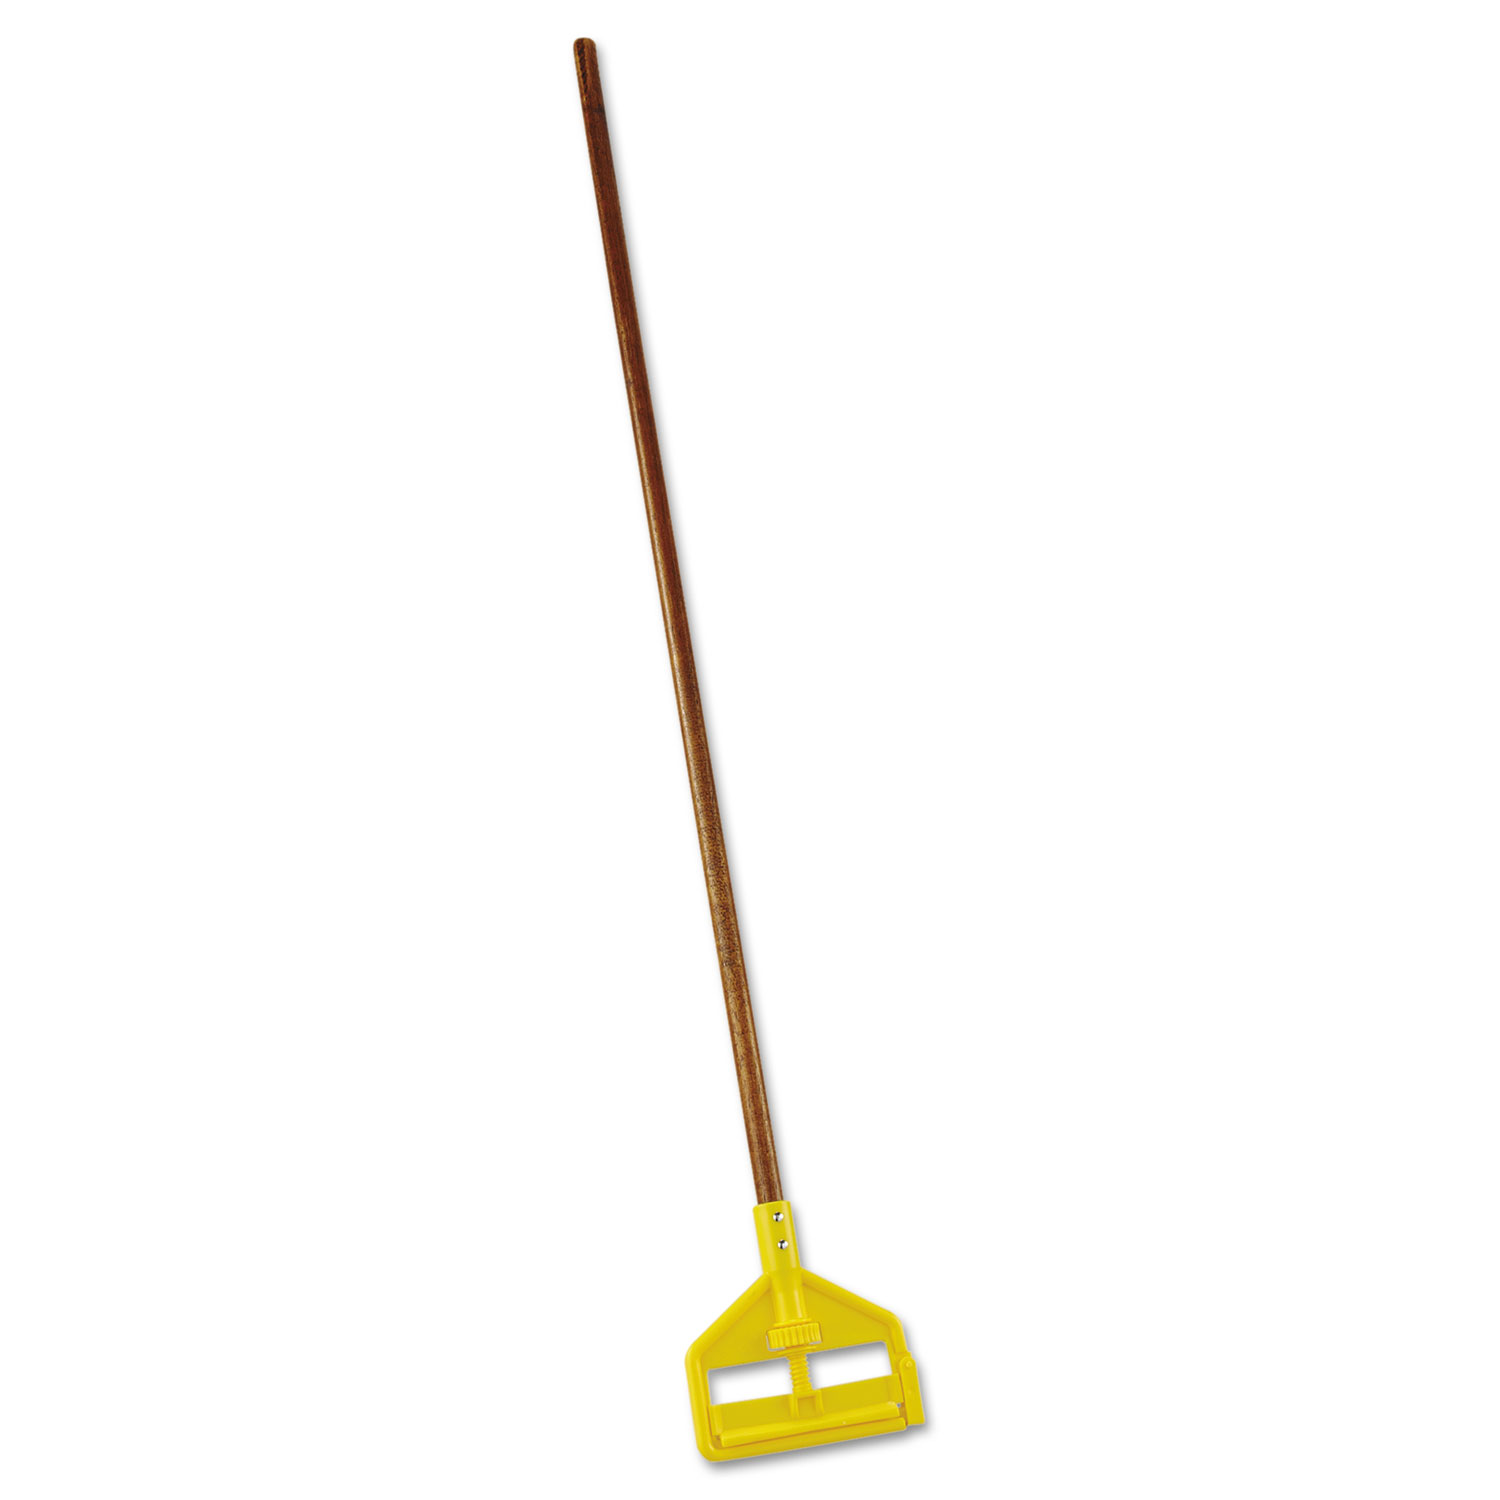  Rubbermaid Commercial FGH115000000 Invader Wood Side-Gate Wet-Mop Handle, 54, Natural/Yellow (RCPH115) 